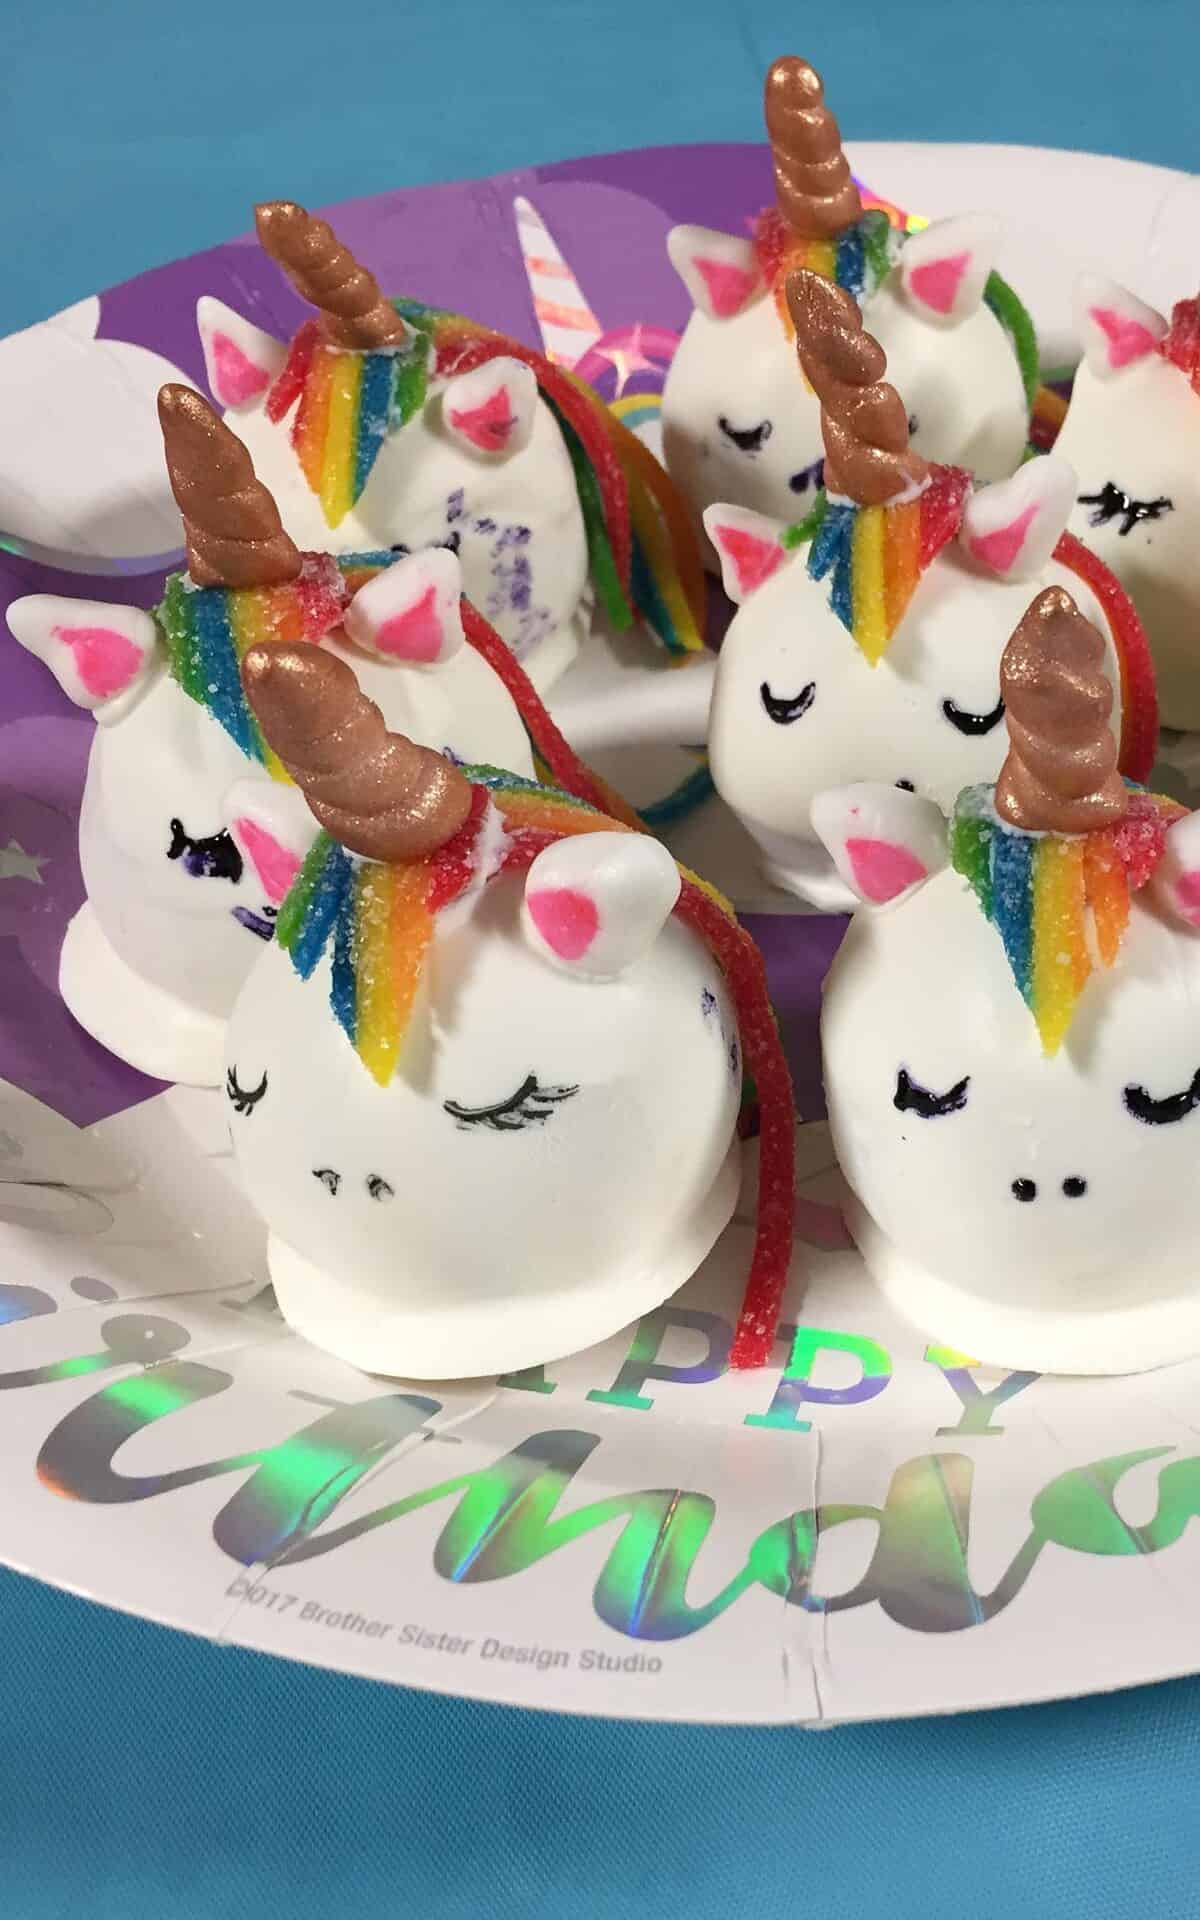  These Unicorn Cake Truffles are as magical as they look!